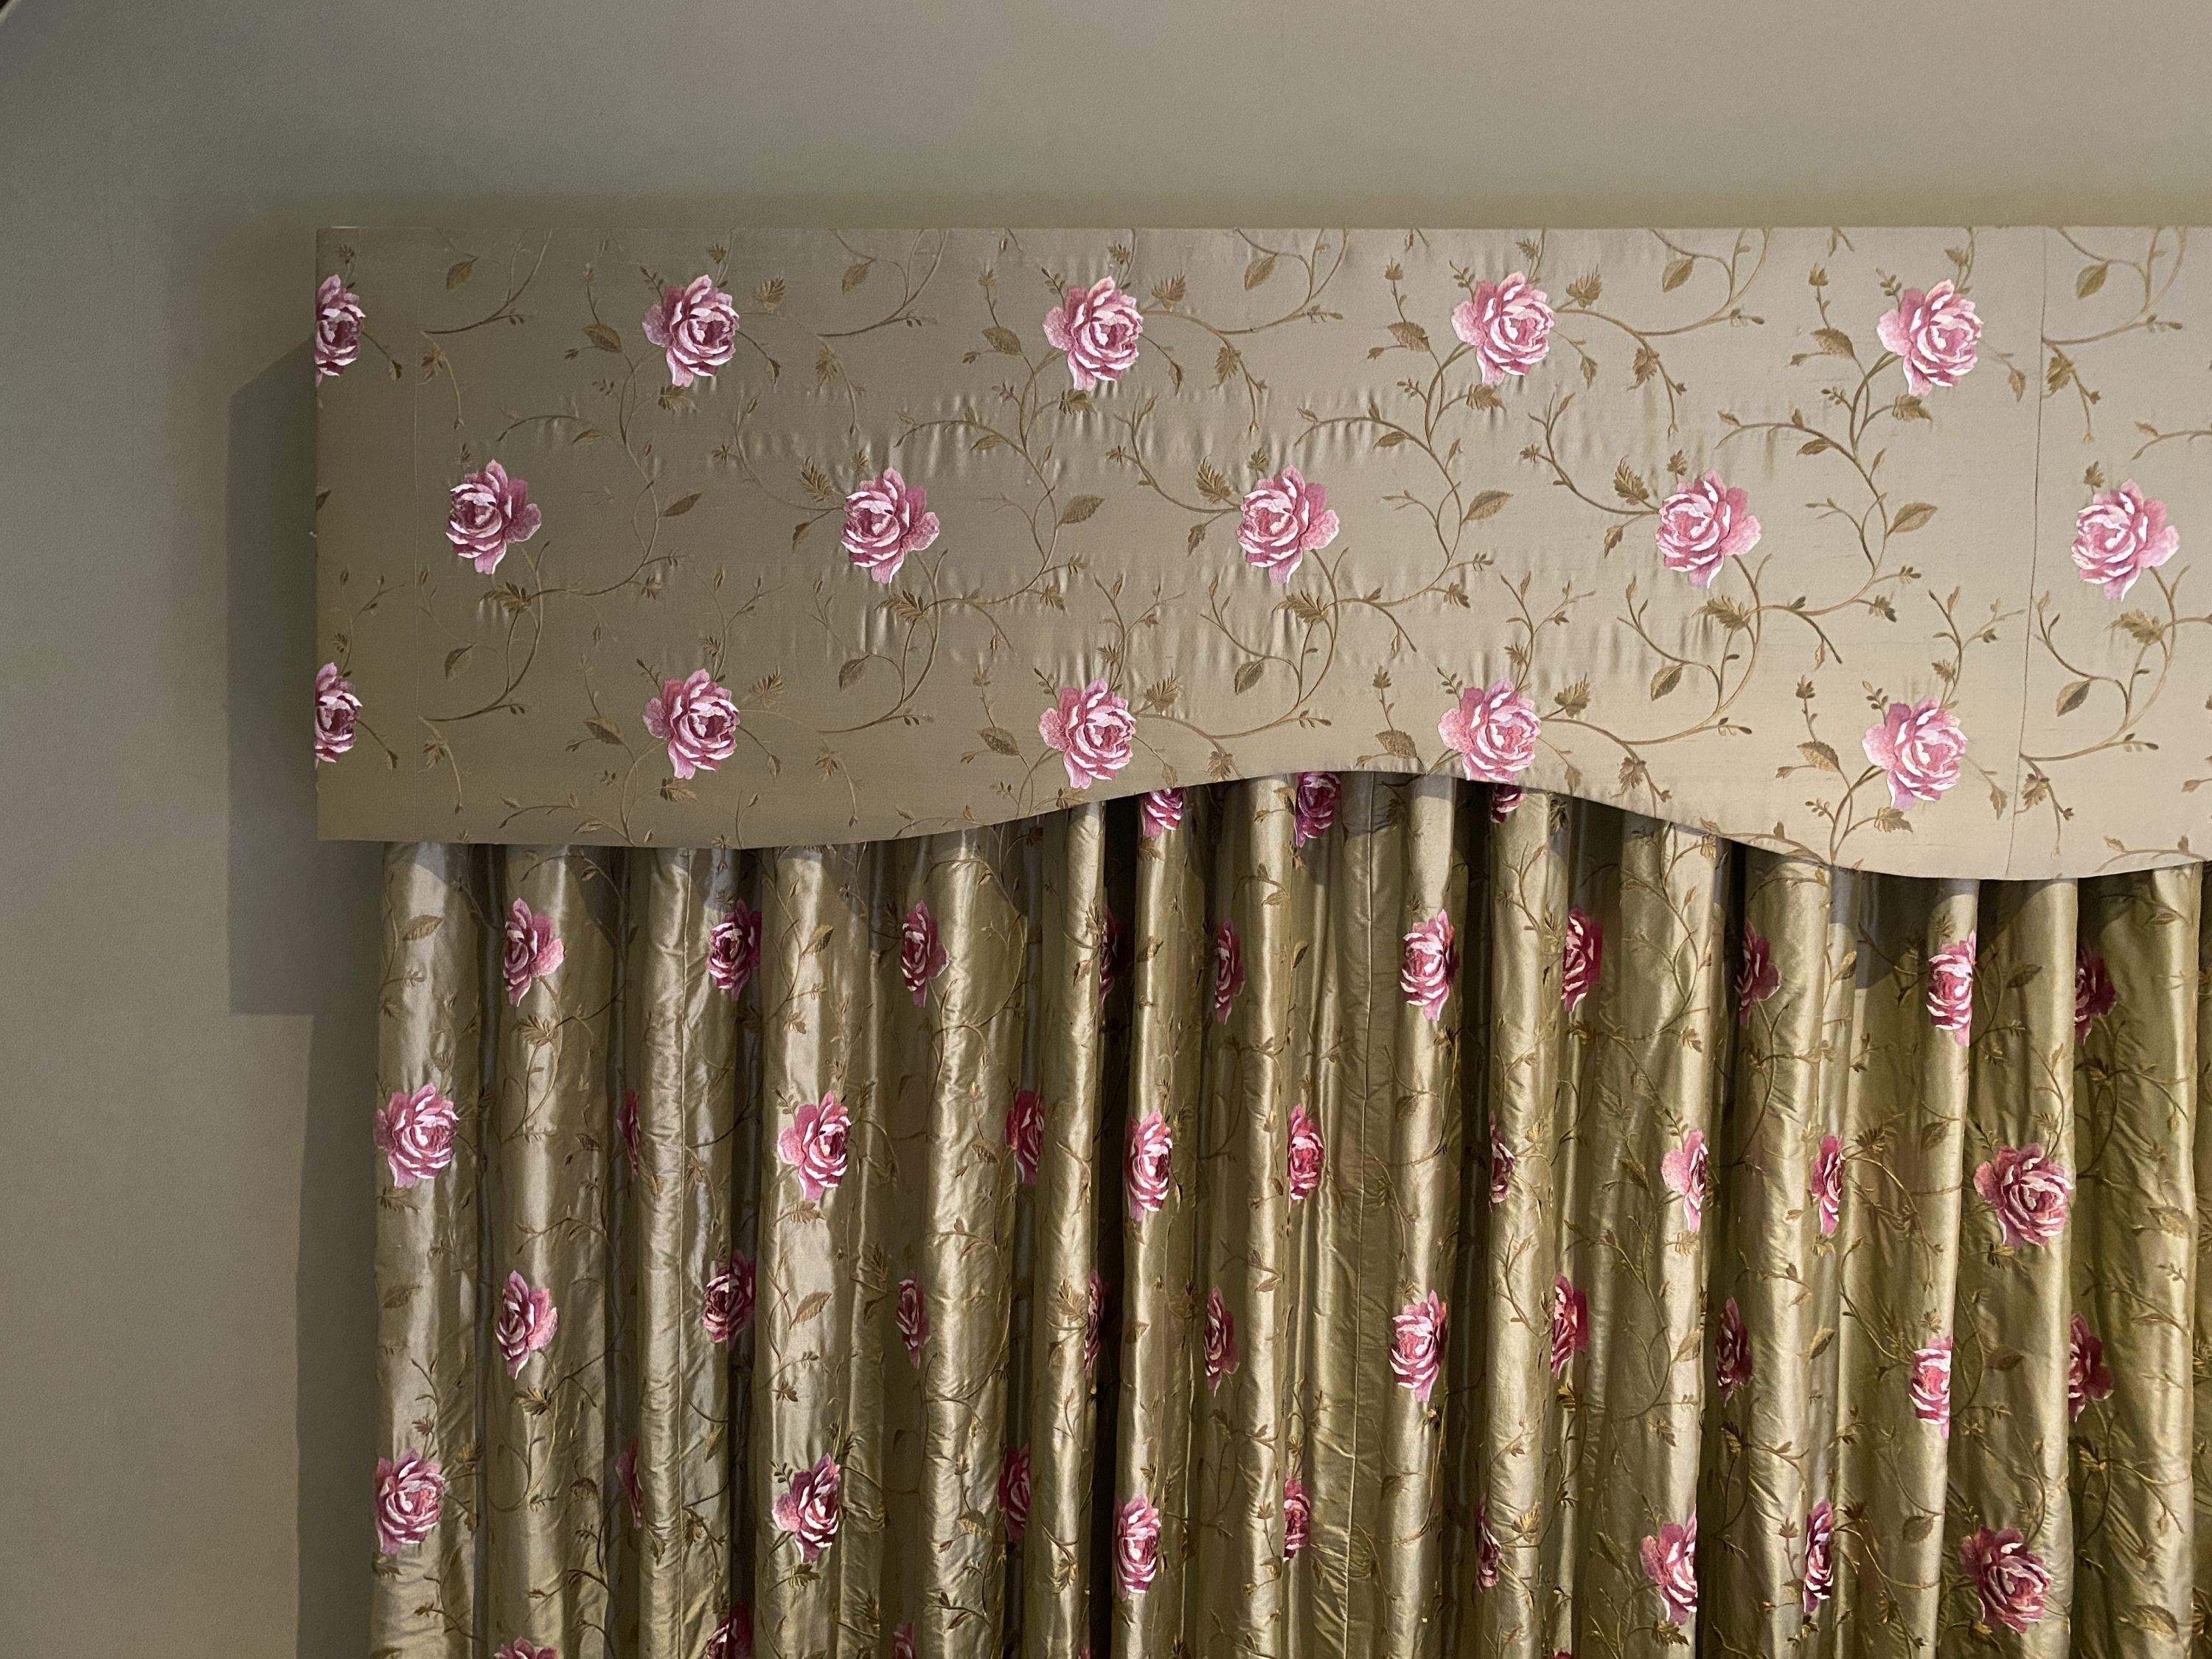 A pair of embroidered woven silk curtains, with pelmet, decorated with pink roses on a eau de nil ground, drop 2.3m, made to generously fit an aperture of 4m width